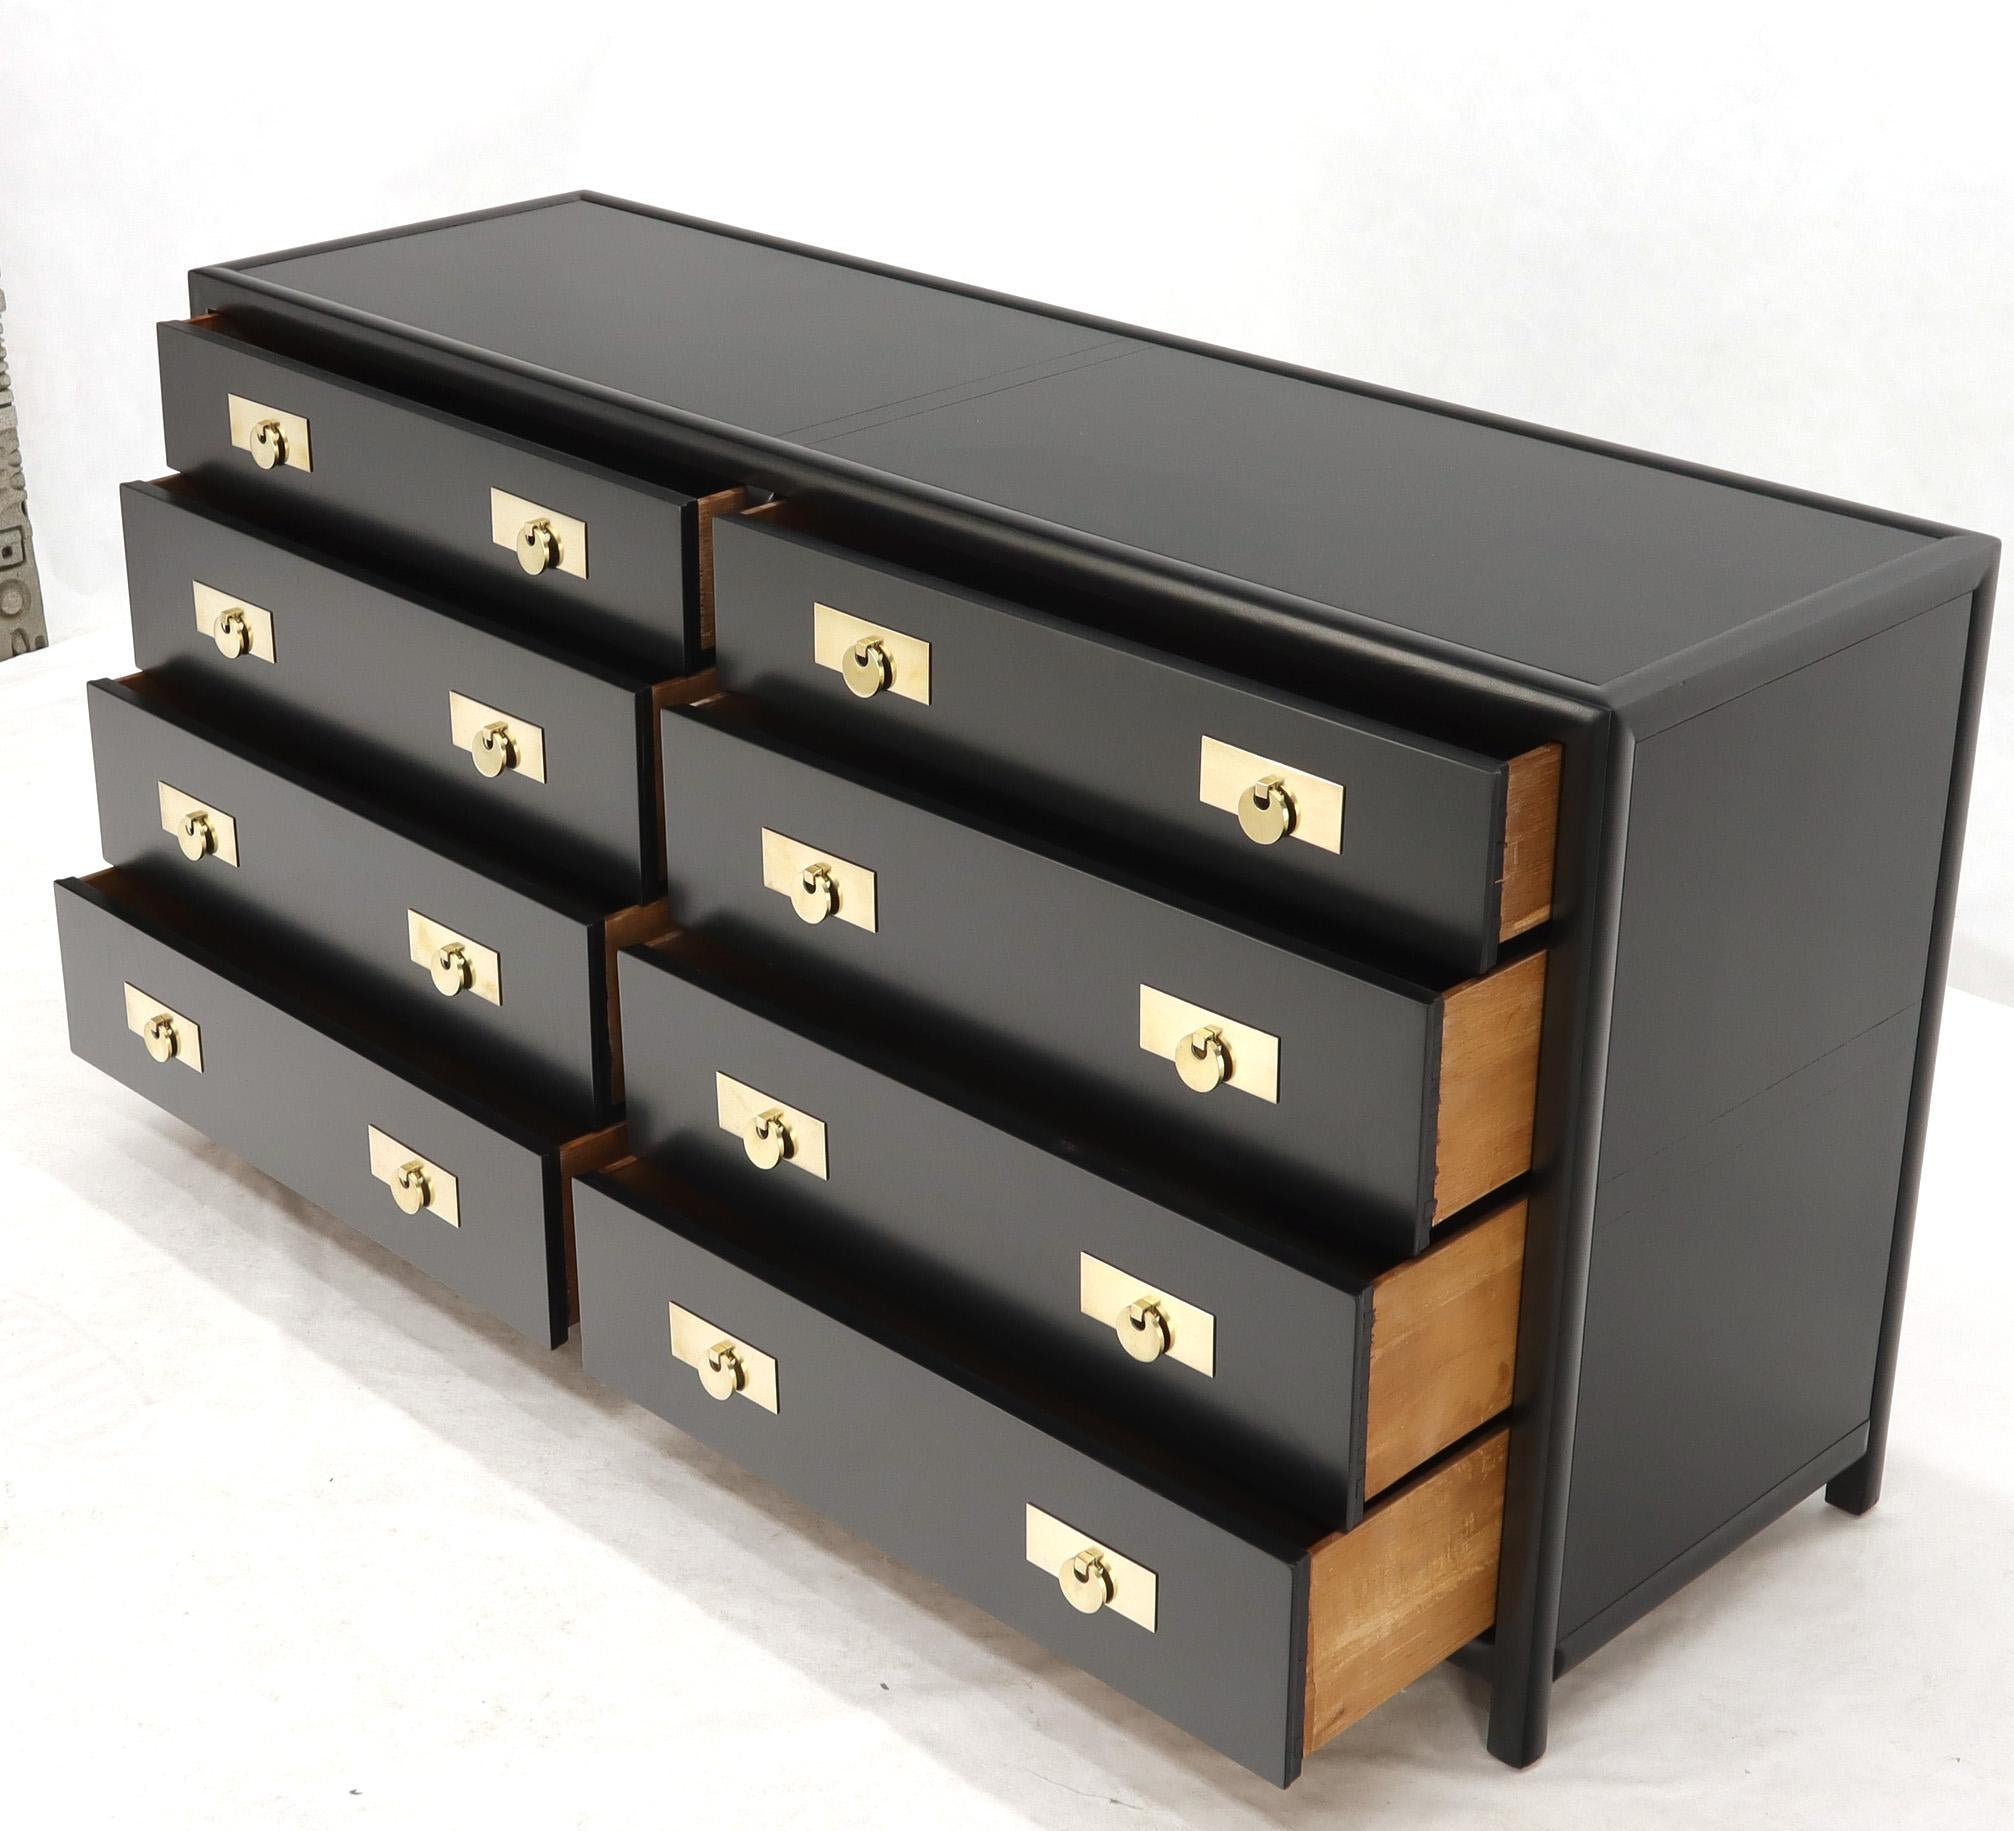 Mid-Century Modern black lacquer finished back double dresser by Baker Furniture Company and designed by Michael Taylor.